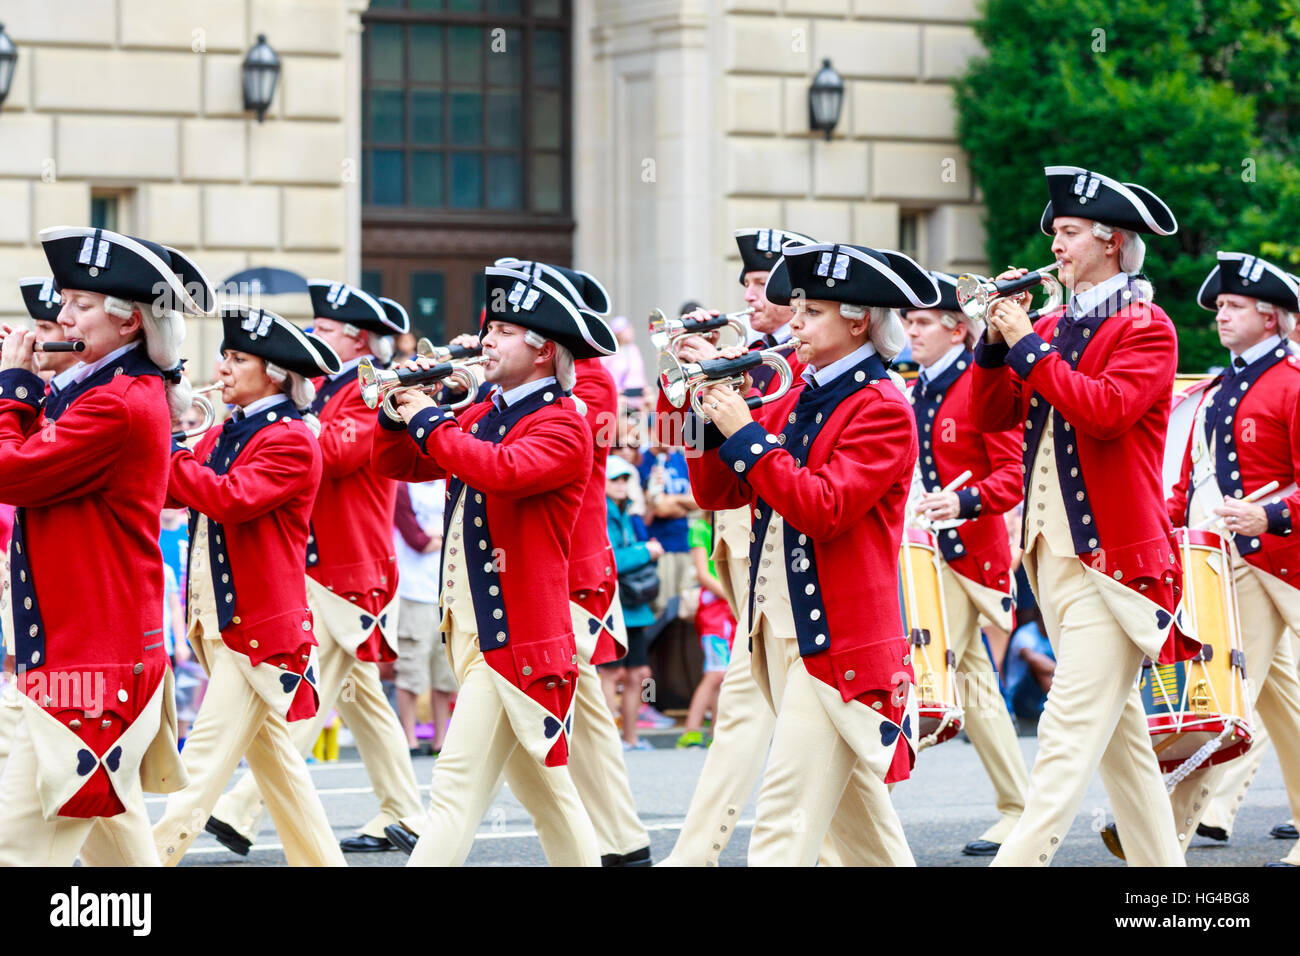 Washington, D.C., USA - July 4, 2015: The United States Army Old Guard Fife and Drum Corps in the annual National Independence Day Parade 2015. Stock Photo